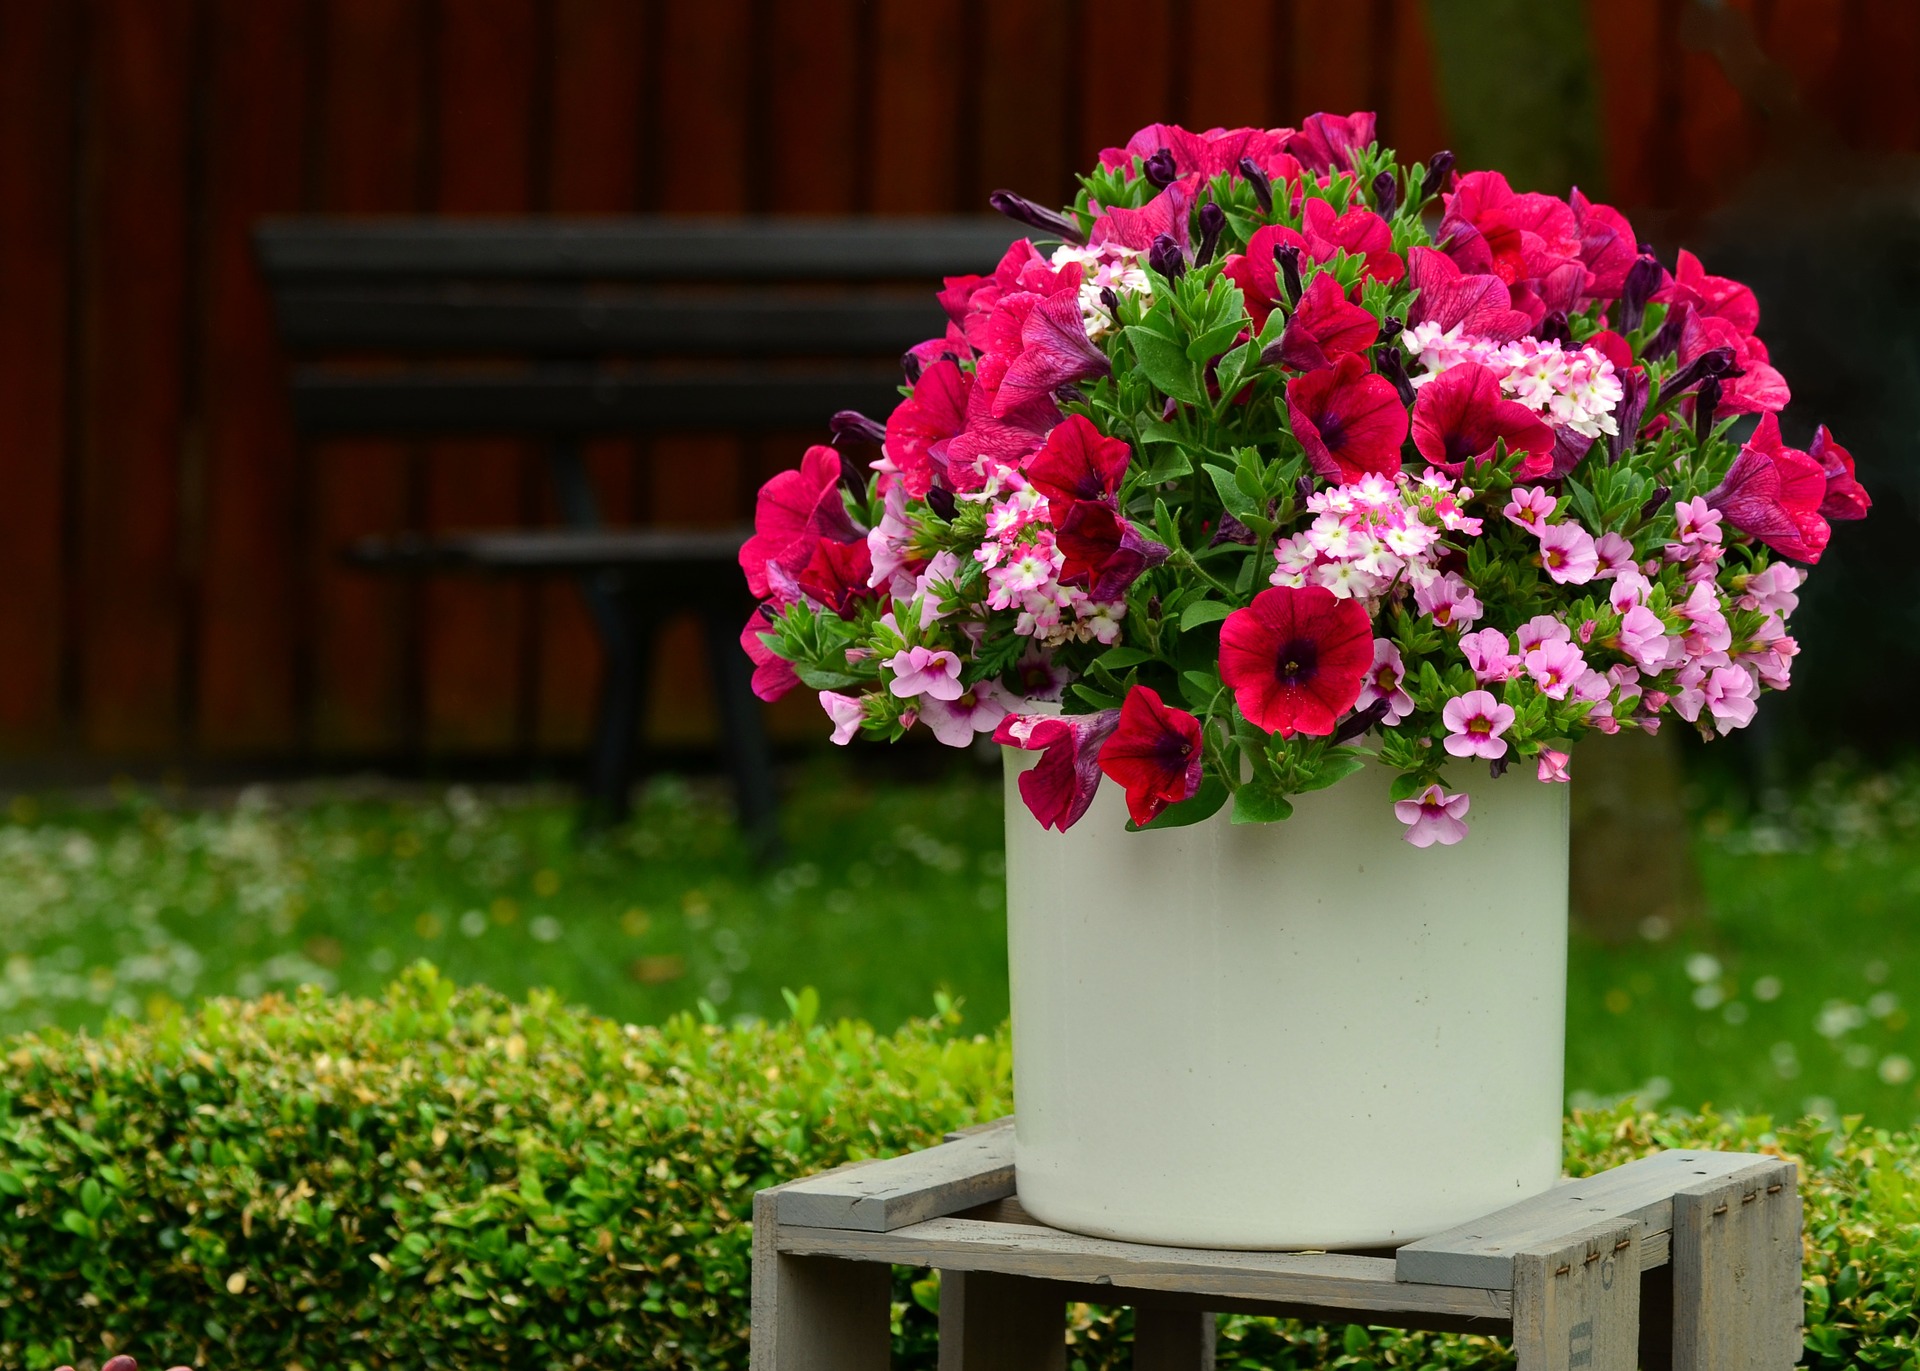 Two simple landscaping ideas: a container planting of pink petunias paired with a well-maintained lawn and boxwood hedge.